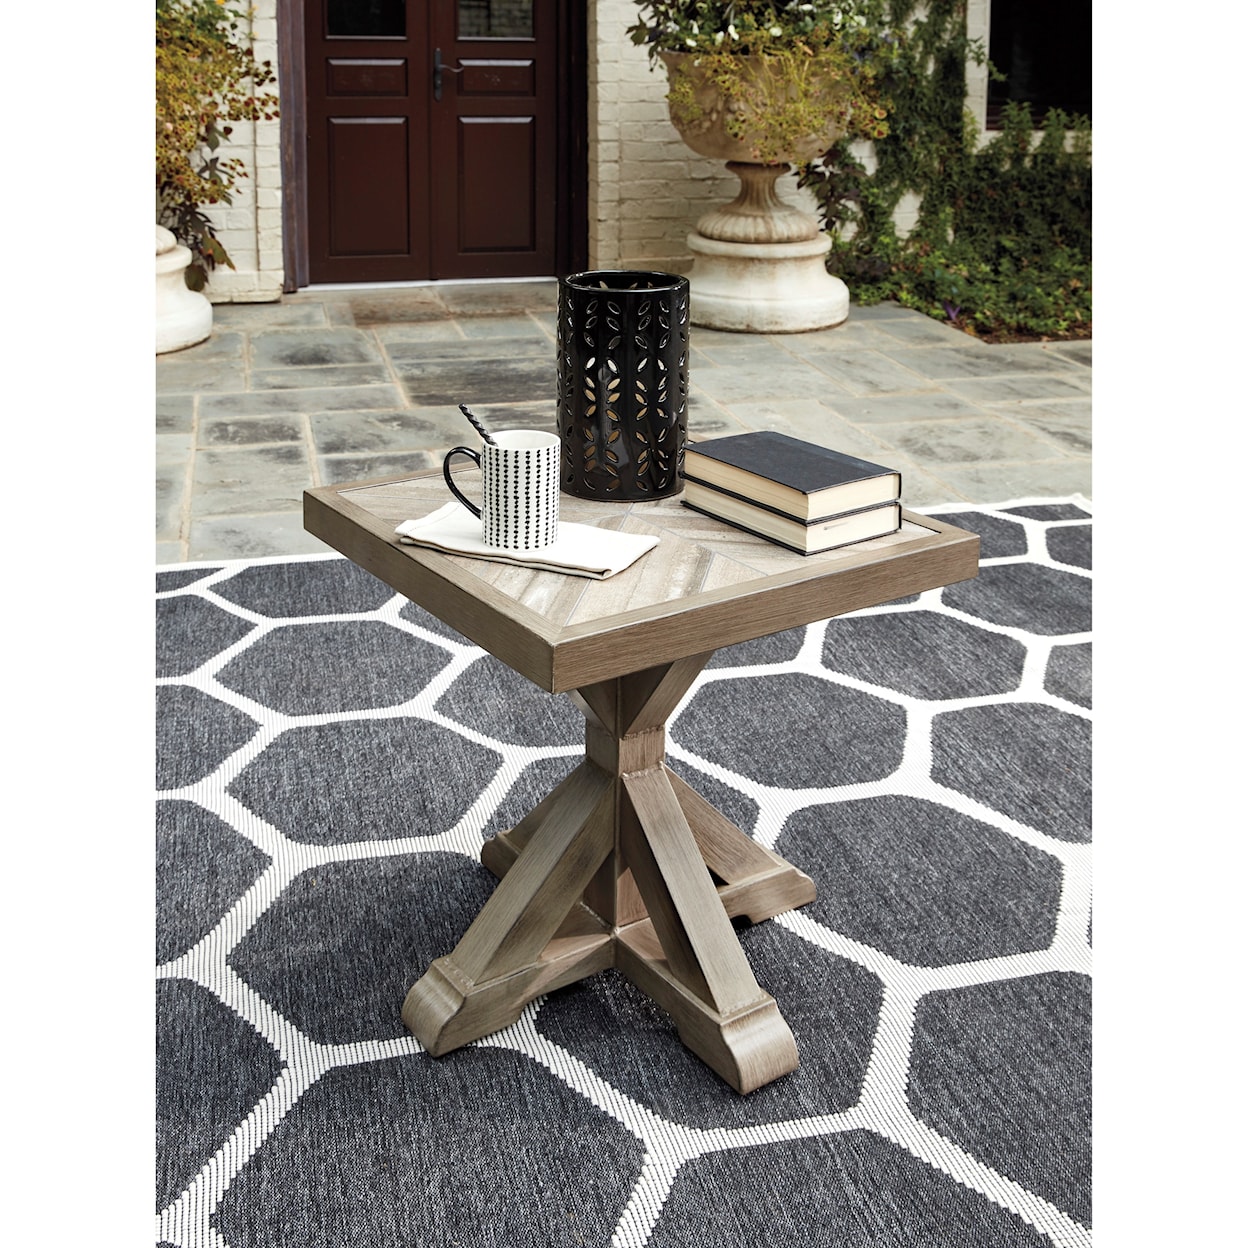 Benchcraft Beachcroft Square End Table